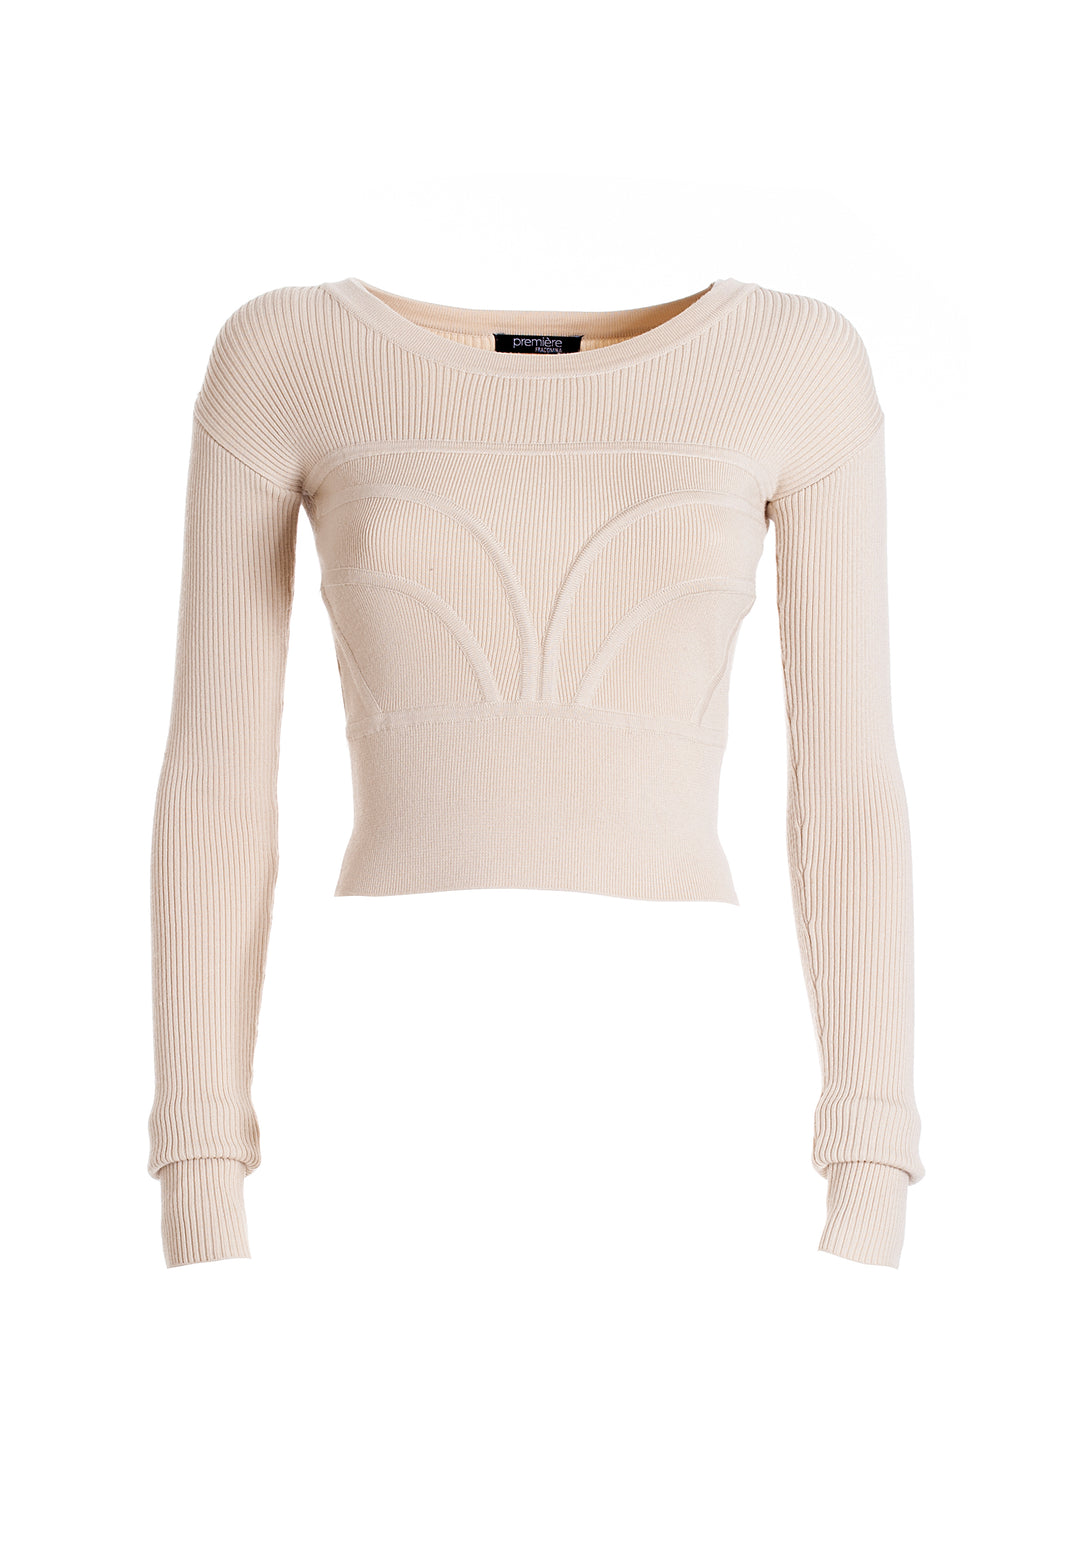 Knitwear tight cropped fit made in rib stitch wool